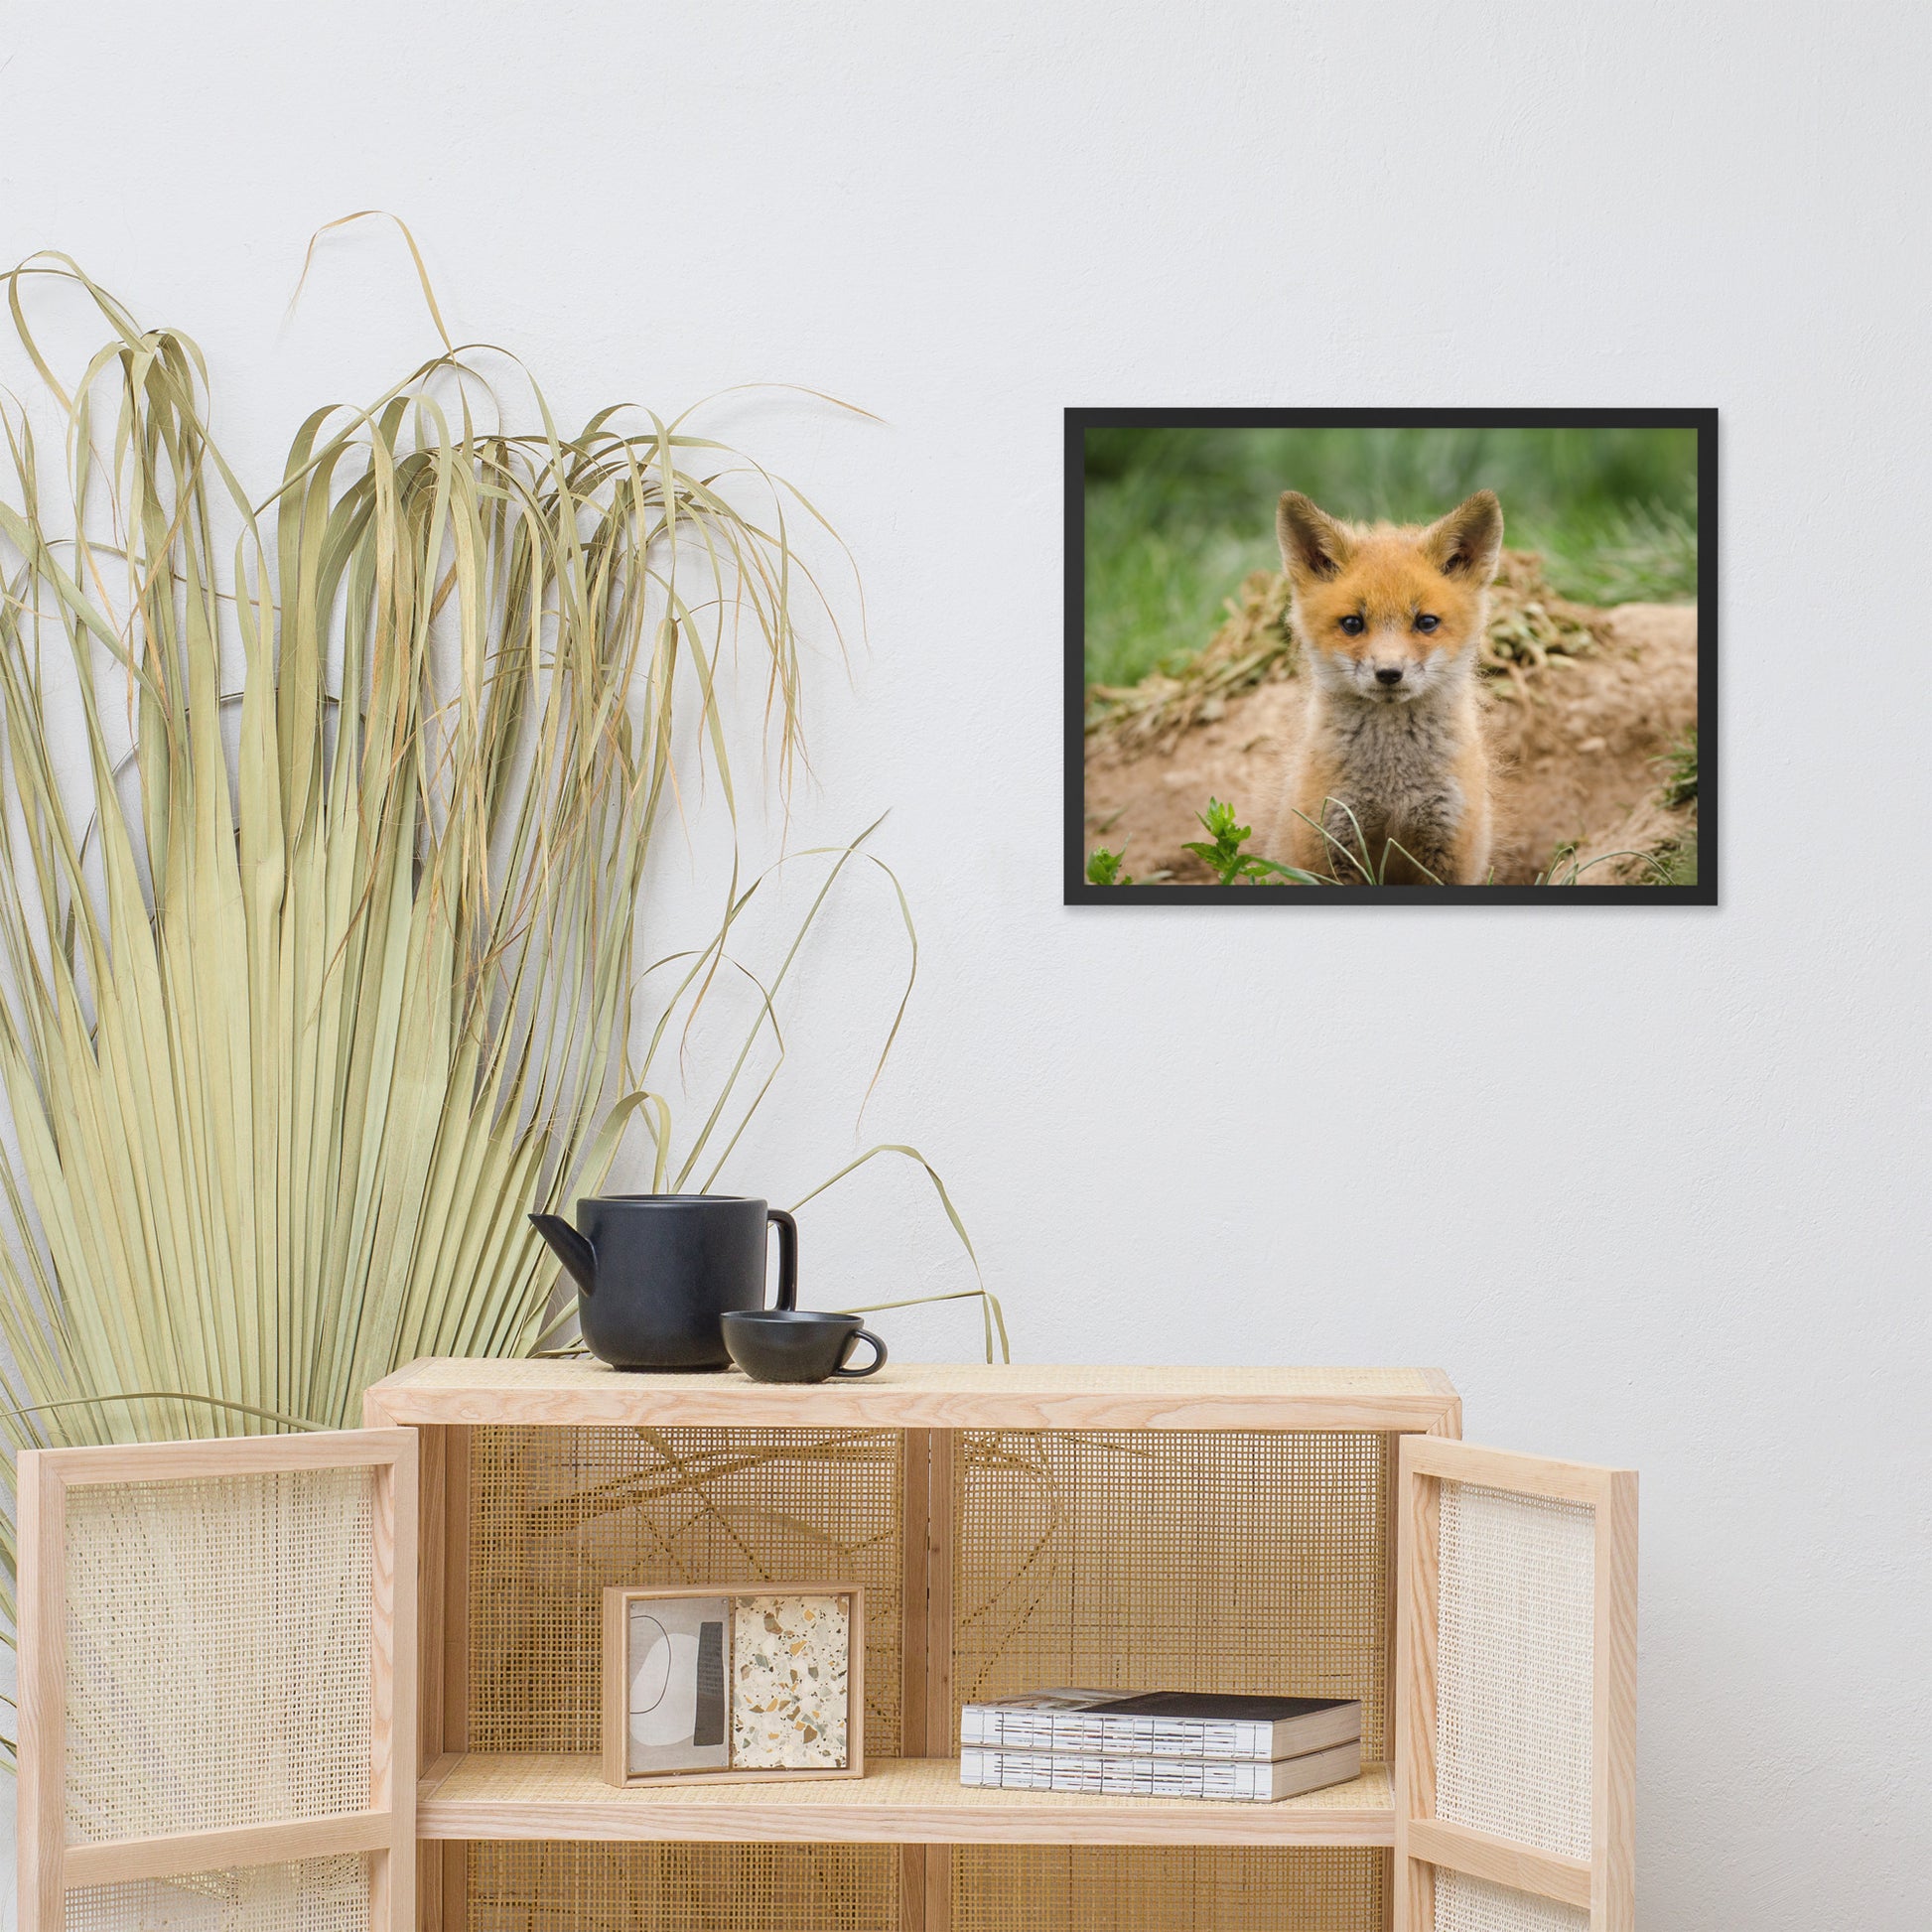 Powder Room Wall Pictures: Baby Young Red Fox Kit/ Animal / Wildlife / Nature Photographic Artwork - Framed Artwork - Wall Decor